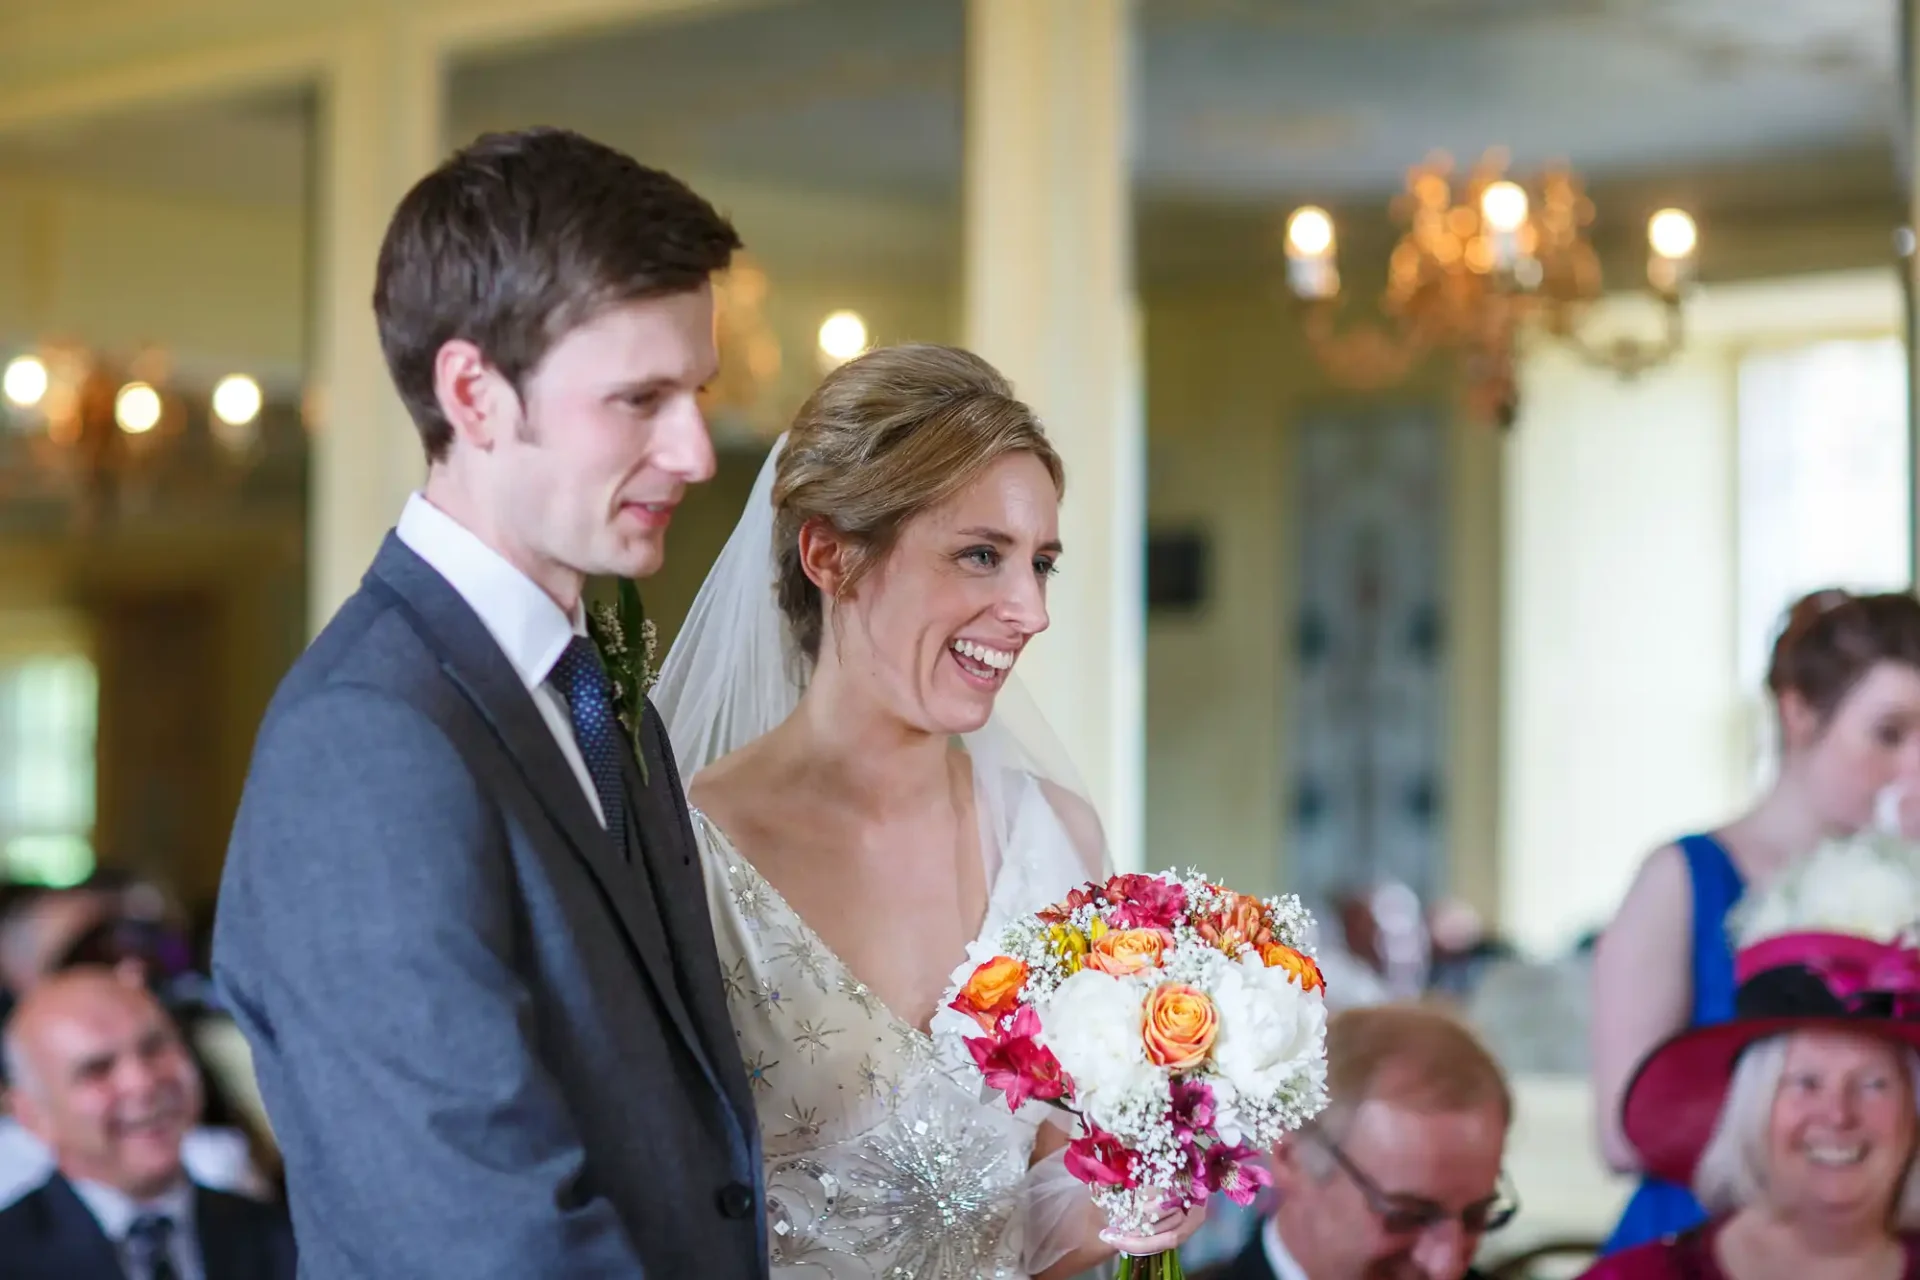 Bride holding a colorful bouquet smiling beside groom in a gray suit, with wedding guests in the background.